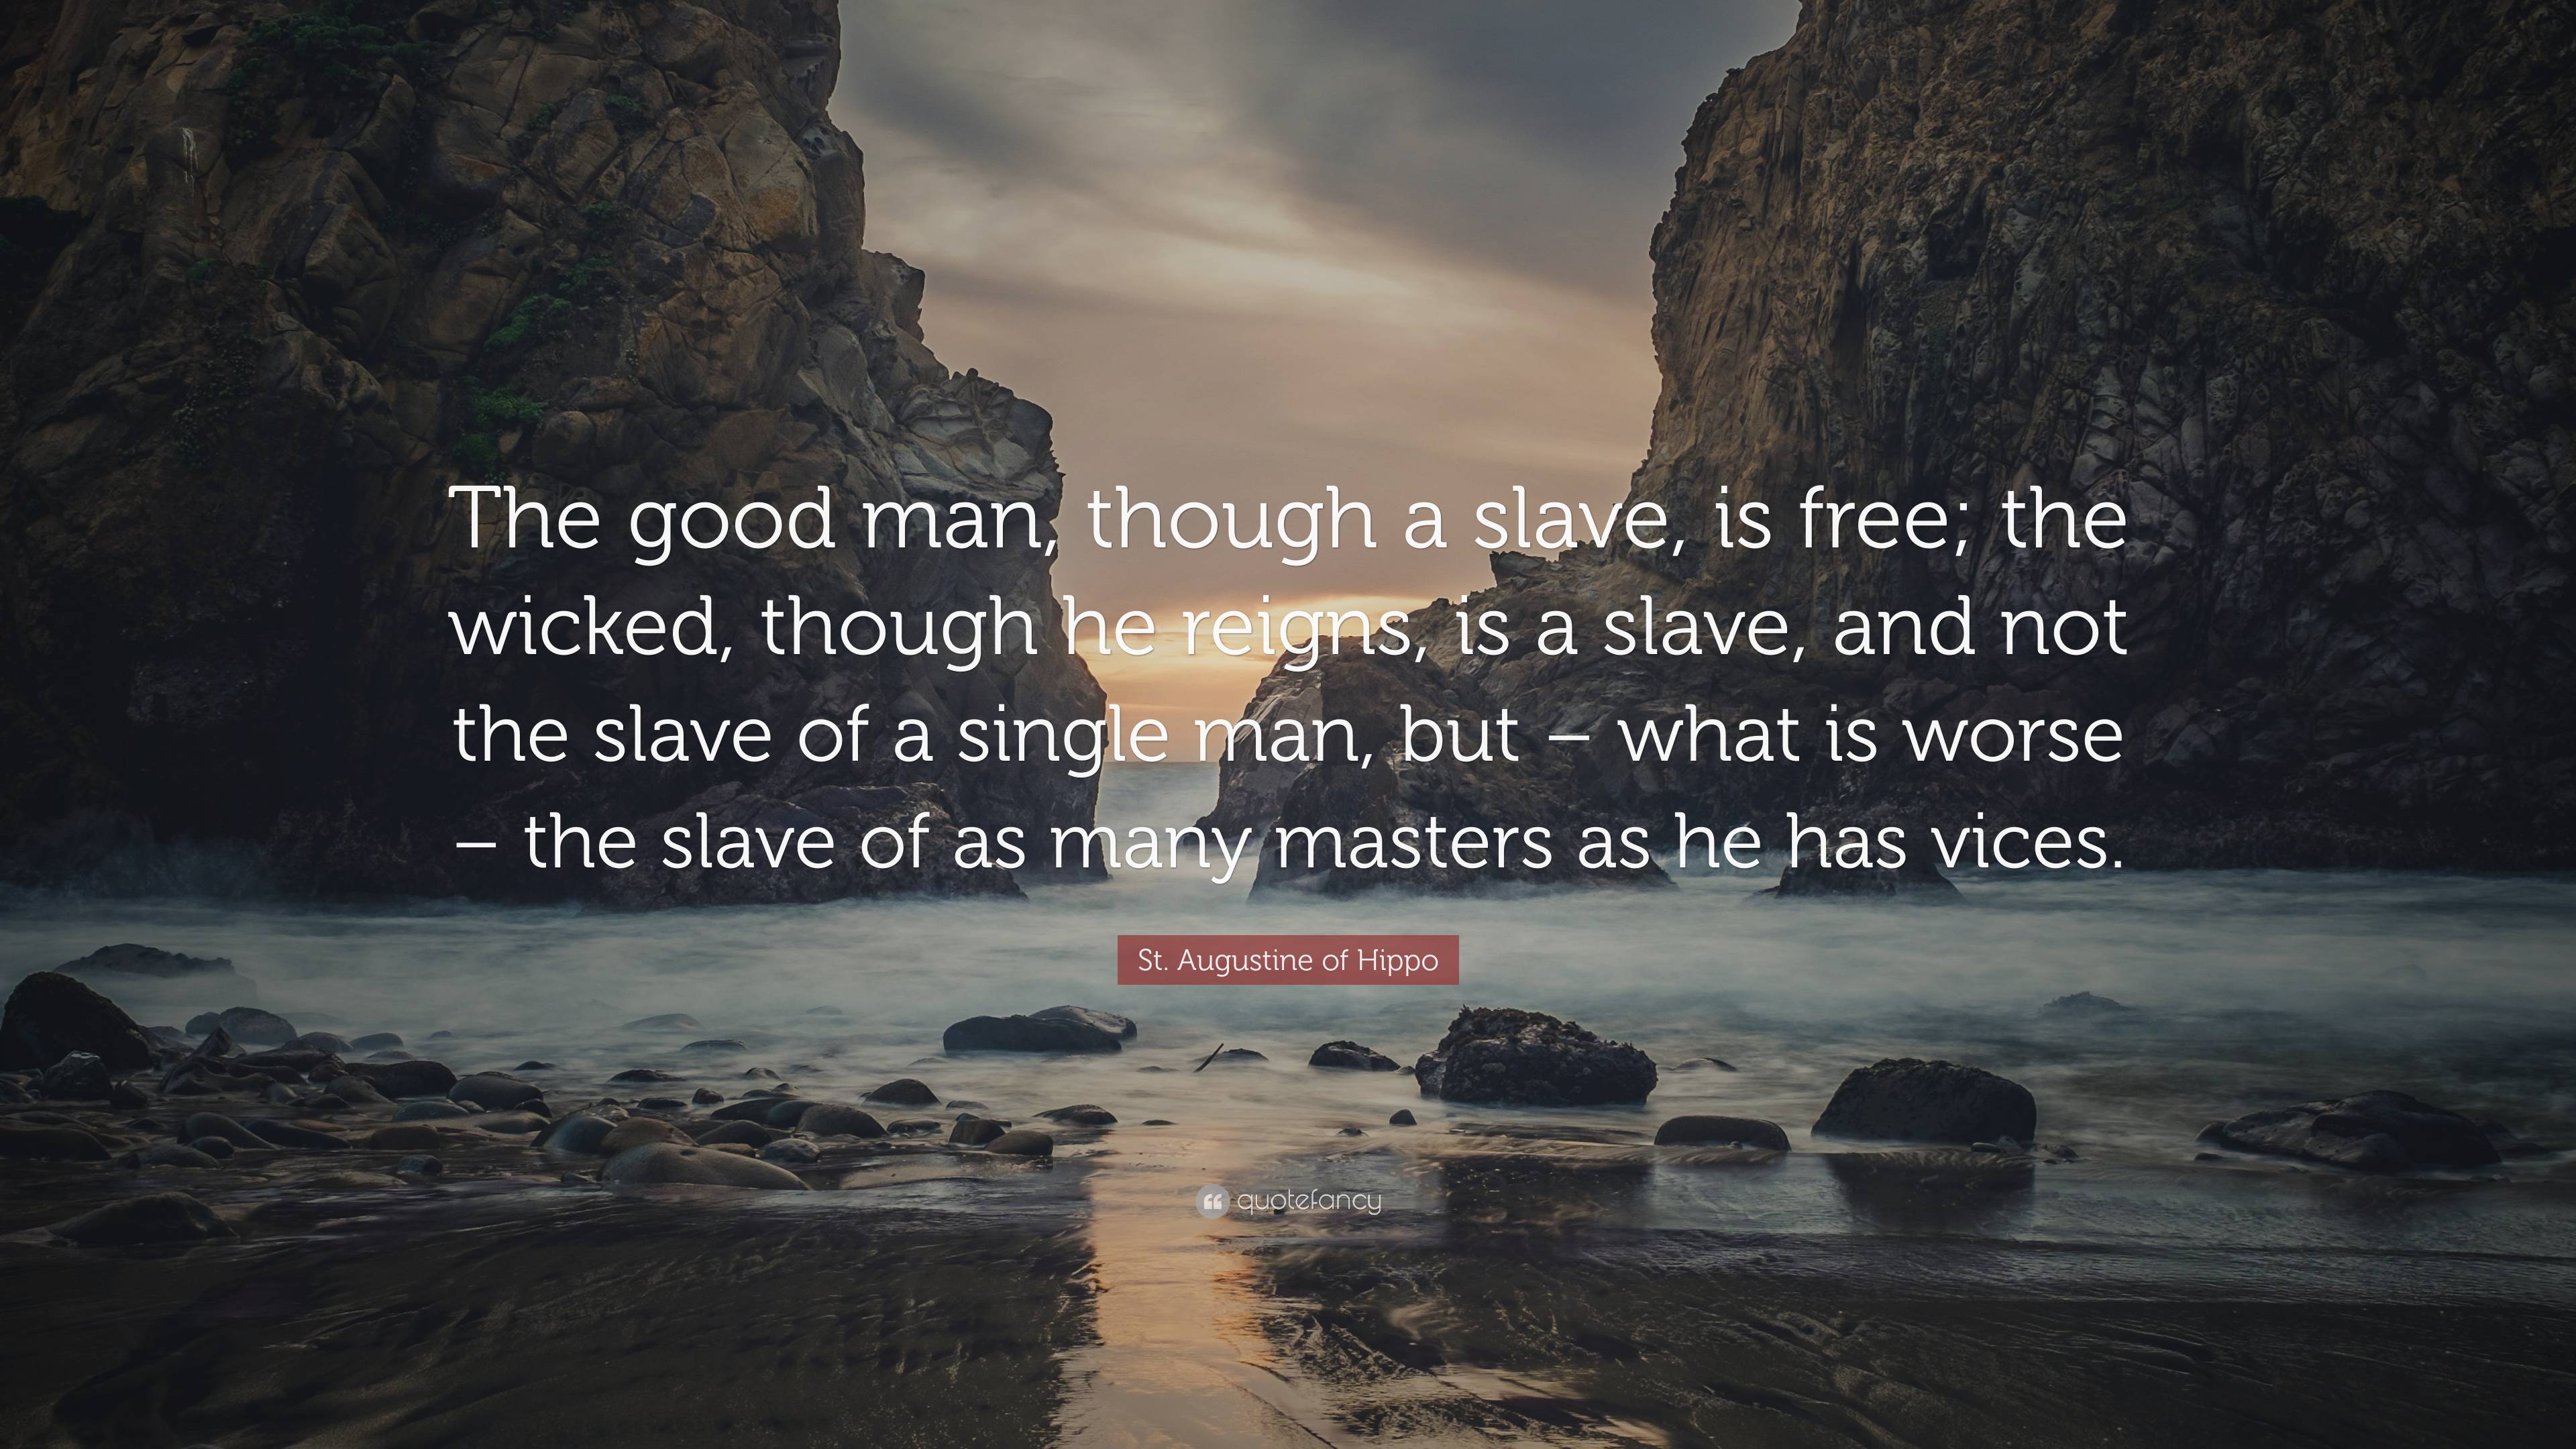 St. Augustine of Hippo Quote: “The good man, though a slave, is free ...